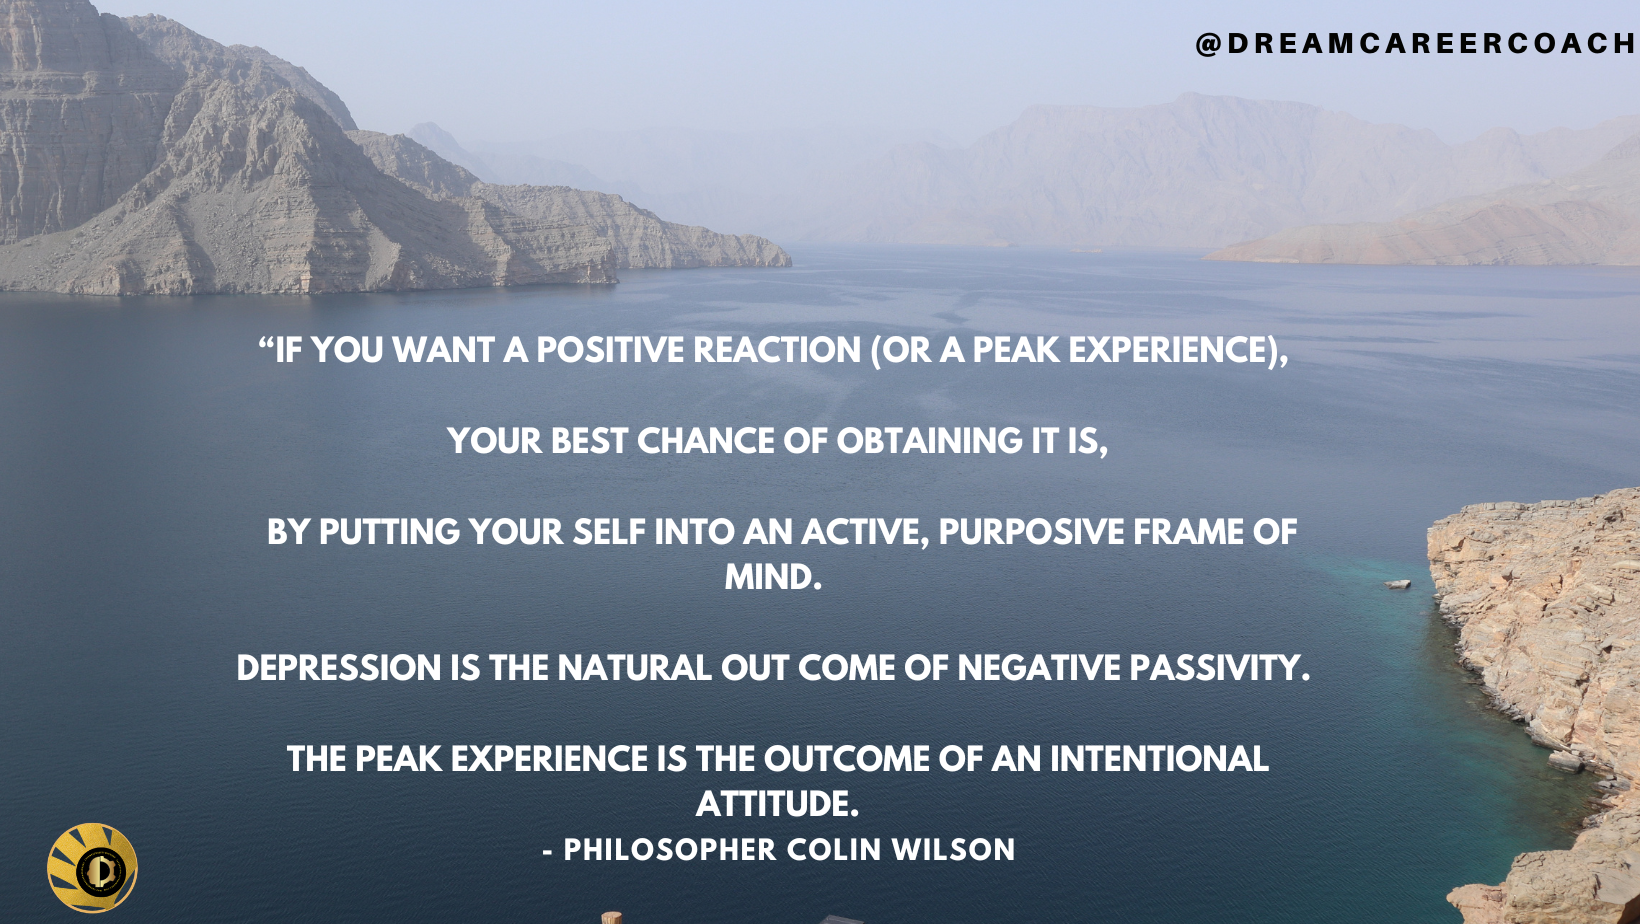 @DREAMCAREERCOACH

     

YOUR BEST CHANCE OF OBTAINING IT IS,

BY PUTTING YOUR SELF INTO AN ACTIVE, PURPOSIVE FRAME OF
L110 R ==

DEPRESSION IS THE NATURAL OUT COME OF NEGATIVE PASSIVITY.

THE PEAK EXPERIENCE IS THE OUTCOME OF AN INTENTIONAL
ATTITUDE.

&) - PHILOSOPHER COLIN WILSON